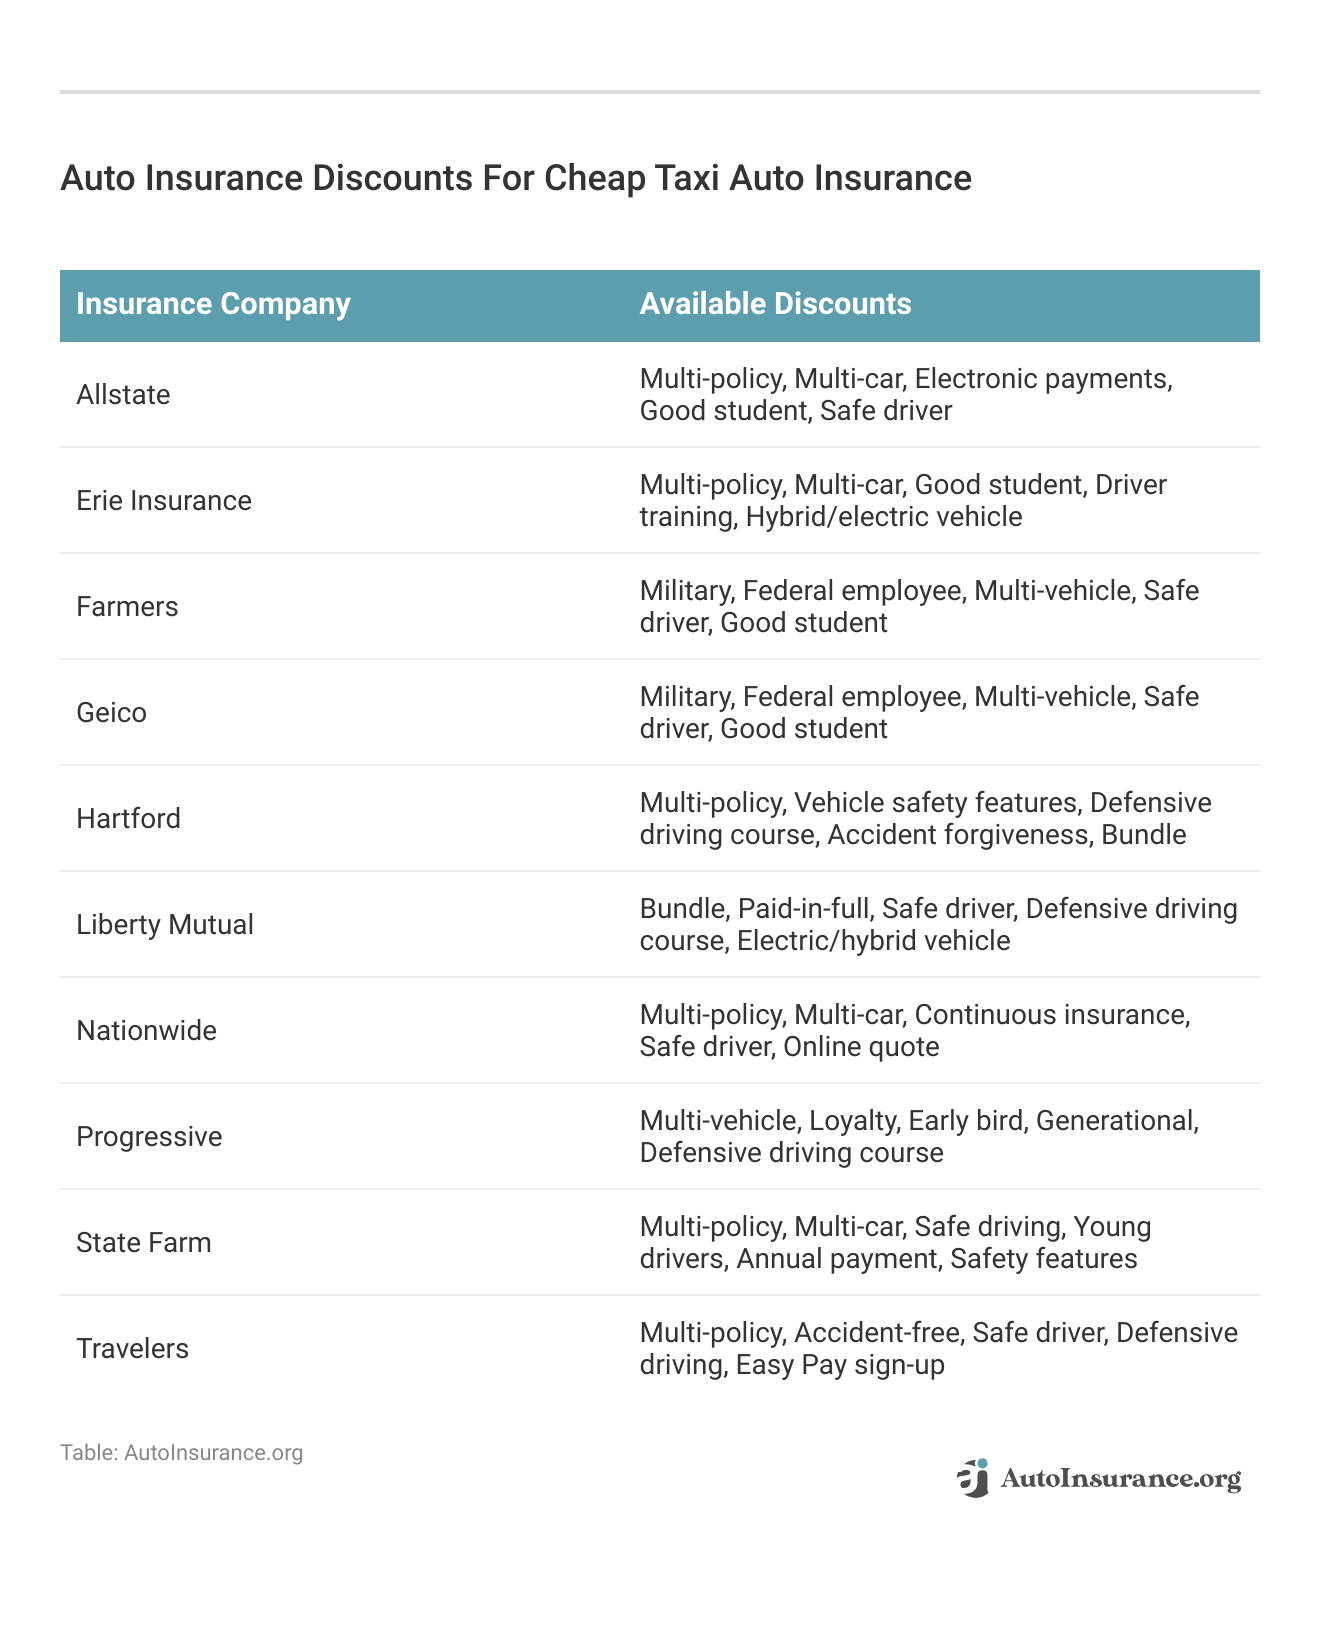 <h3>Auto Insurance Discounts For Cheap Taxi Auto Insurance</h3>